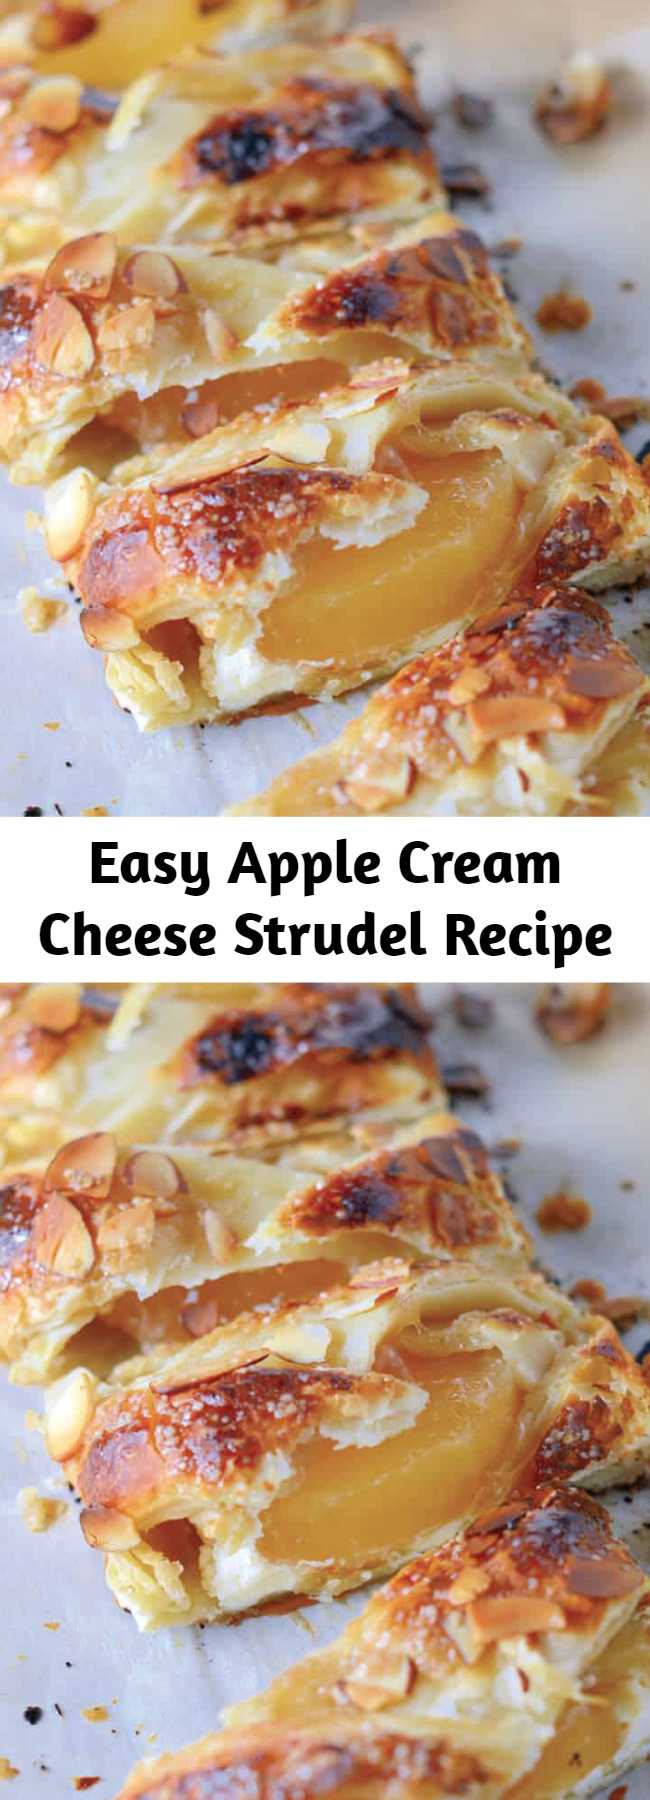 Easy Apple Cream Cheese Strudel Recipe - Pastry isn’t as challenging as you might think! My Easy Apple Cream Cheese Strudel uses only 6 ingredients and 10 minutes to prepare for a fancy-pants breakfast or dessert! #applestrudel #easystrudelrecipe